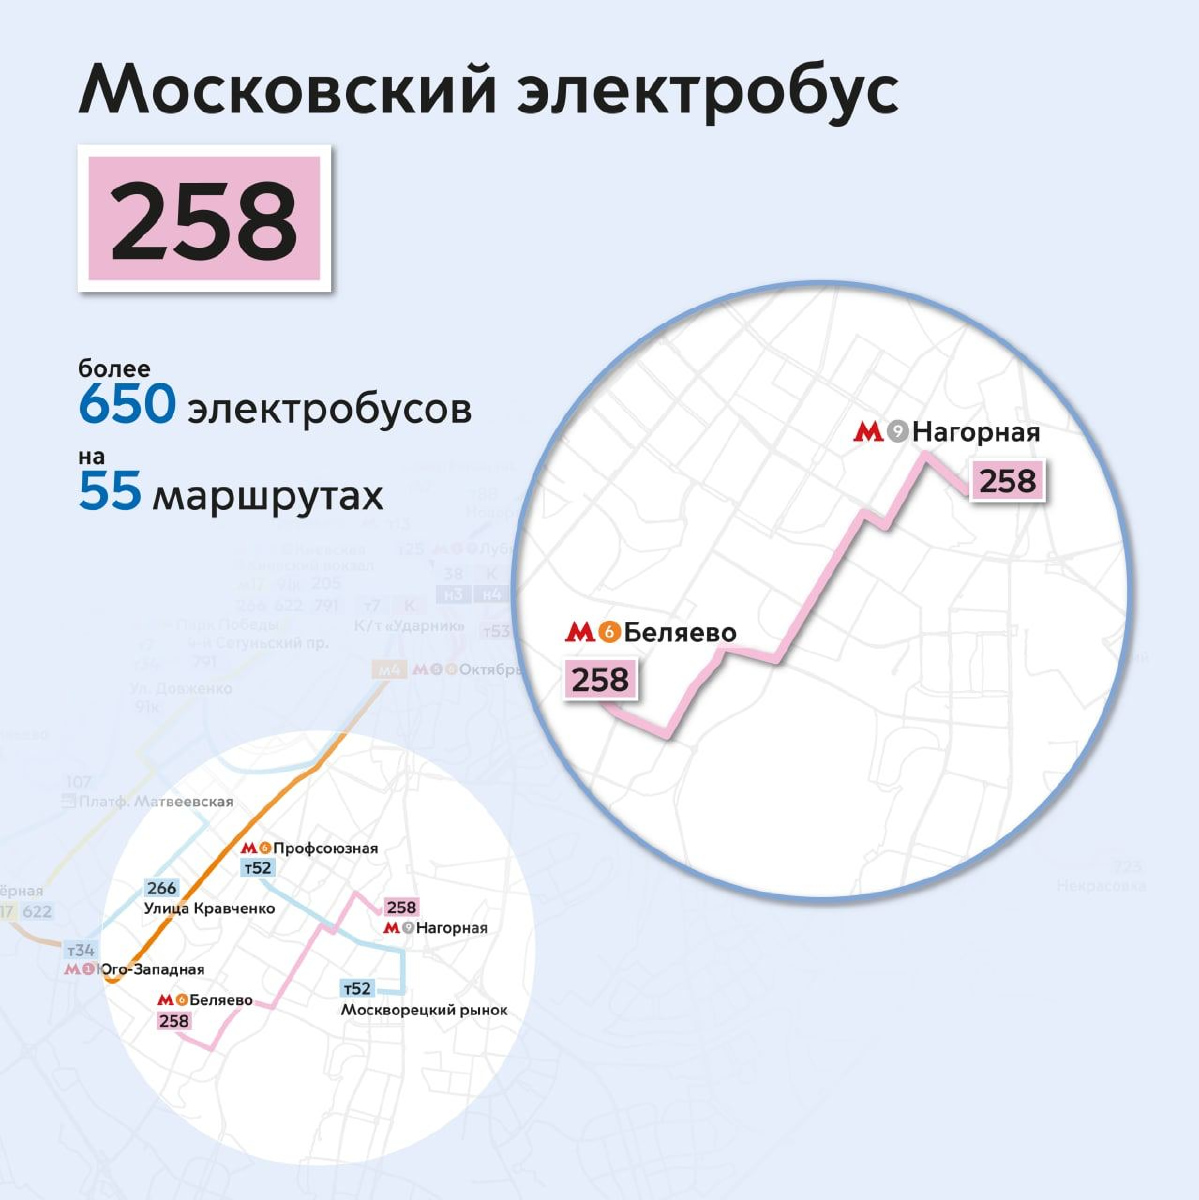 Moscow — Individual Route Maps; Moscow — Maps of Autonomous Electric Bus Lines